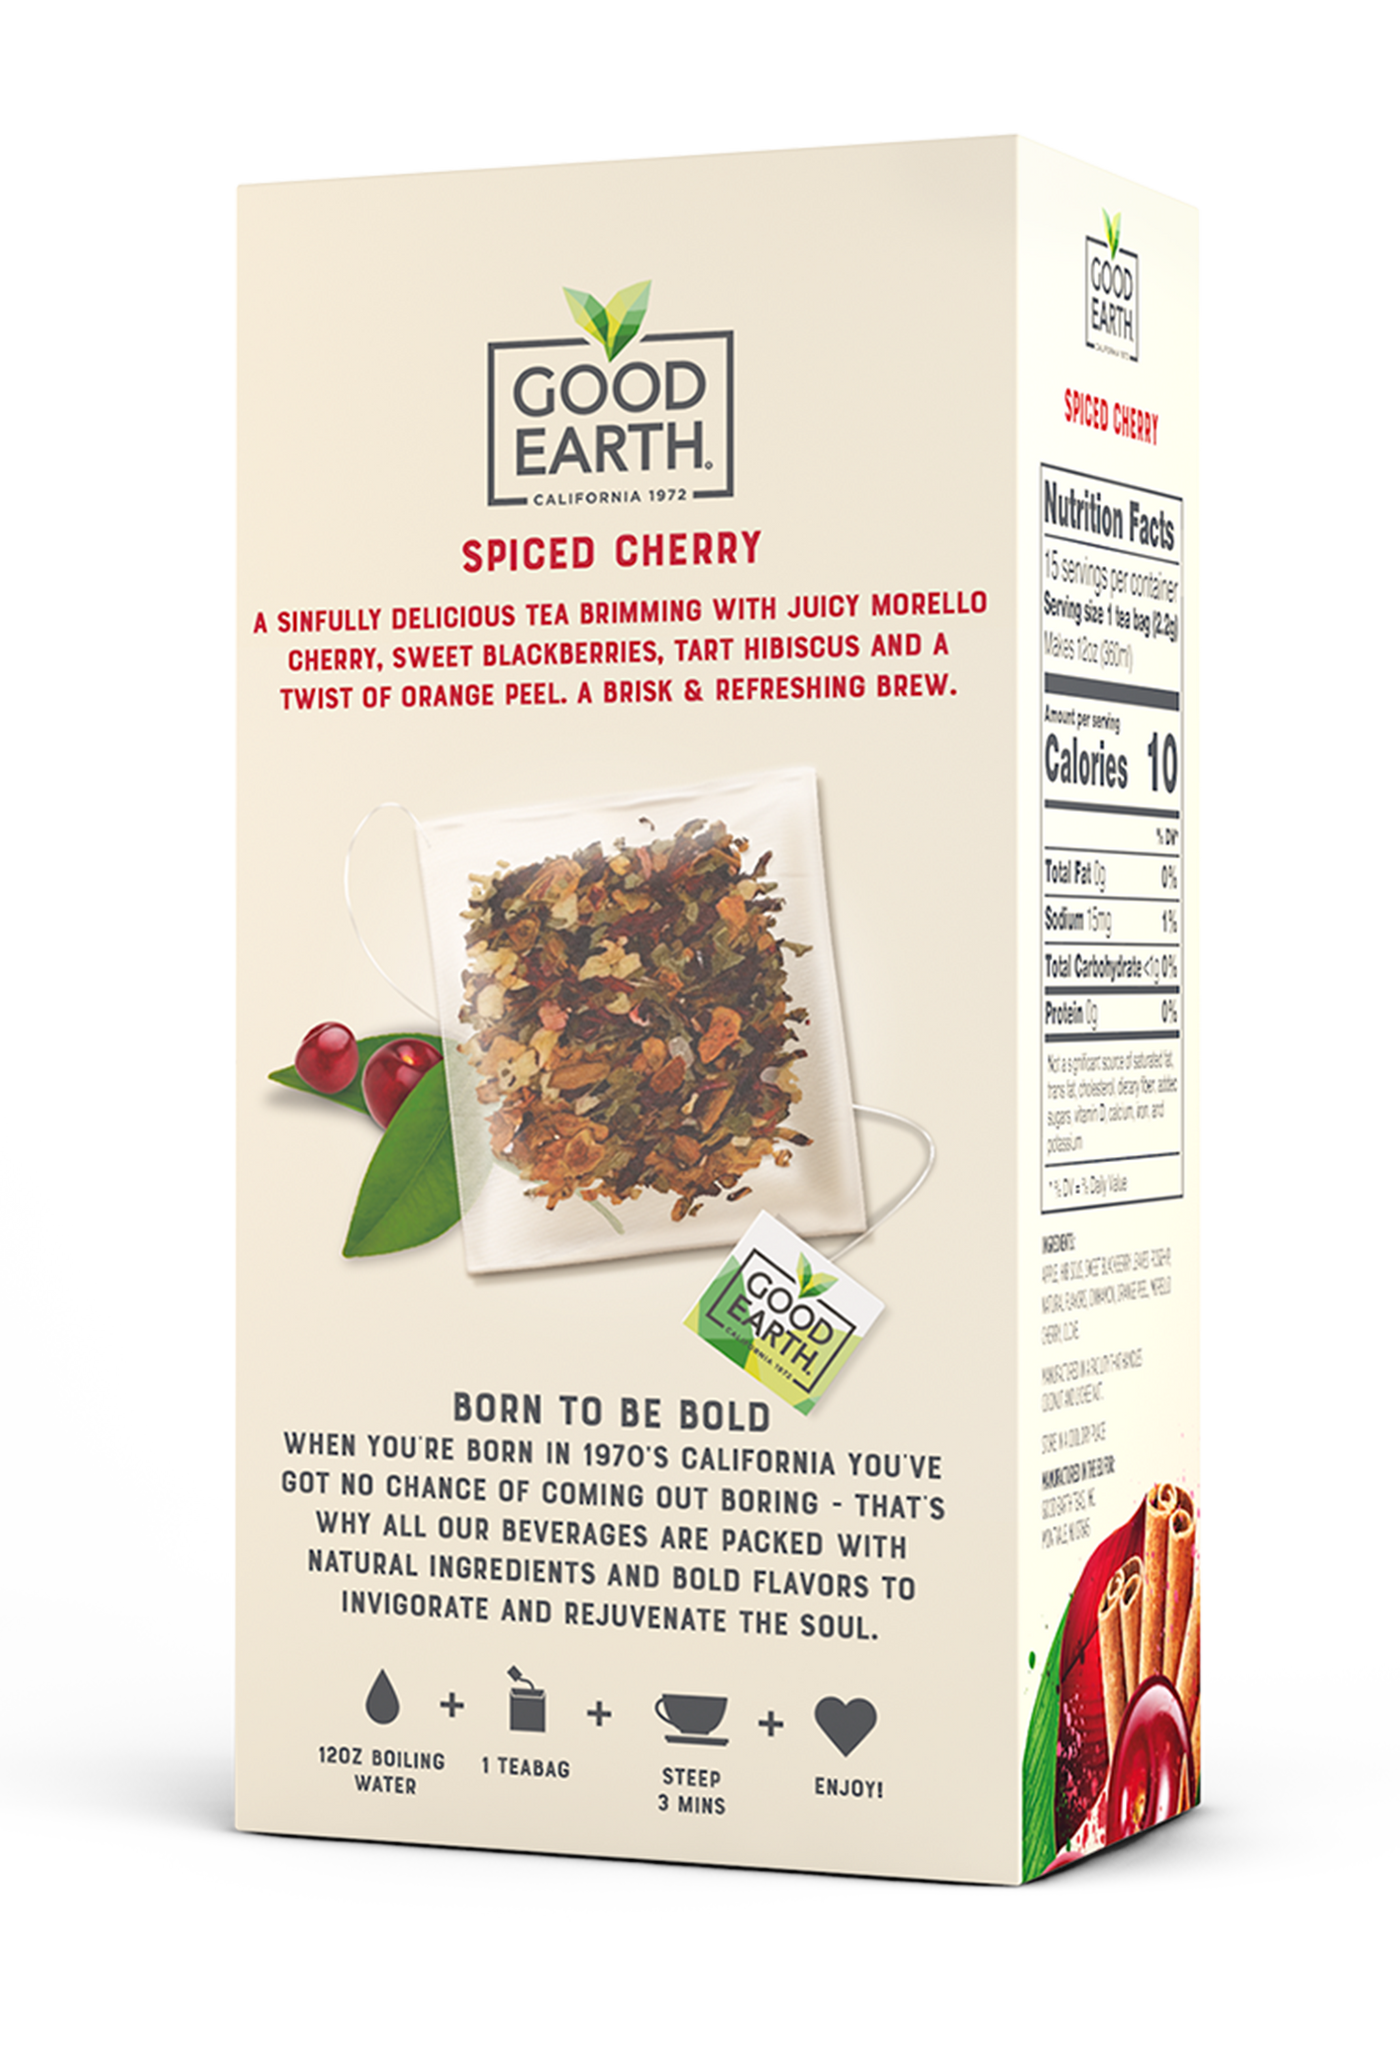 Spiced Cherry packaging